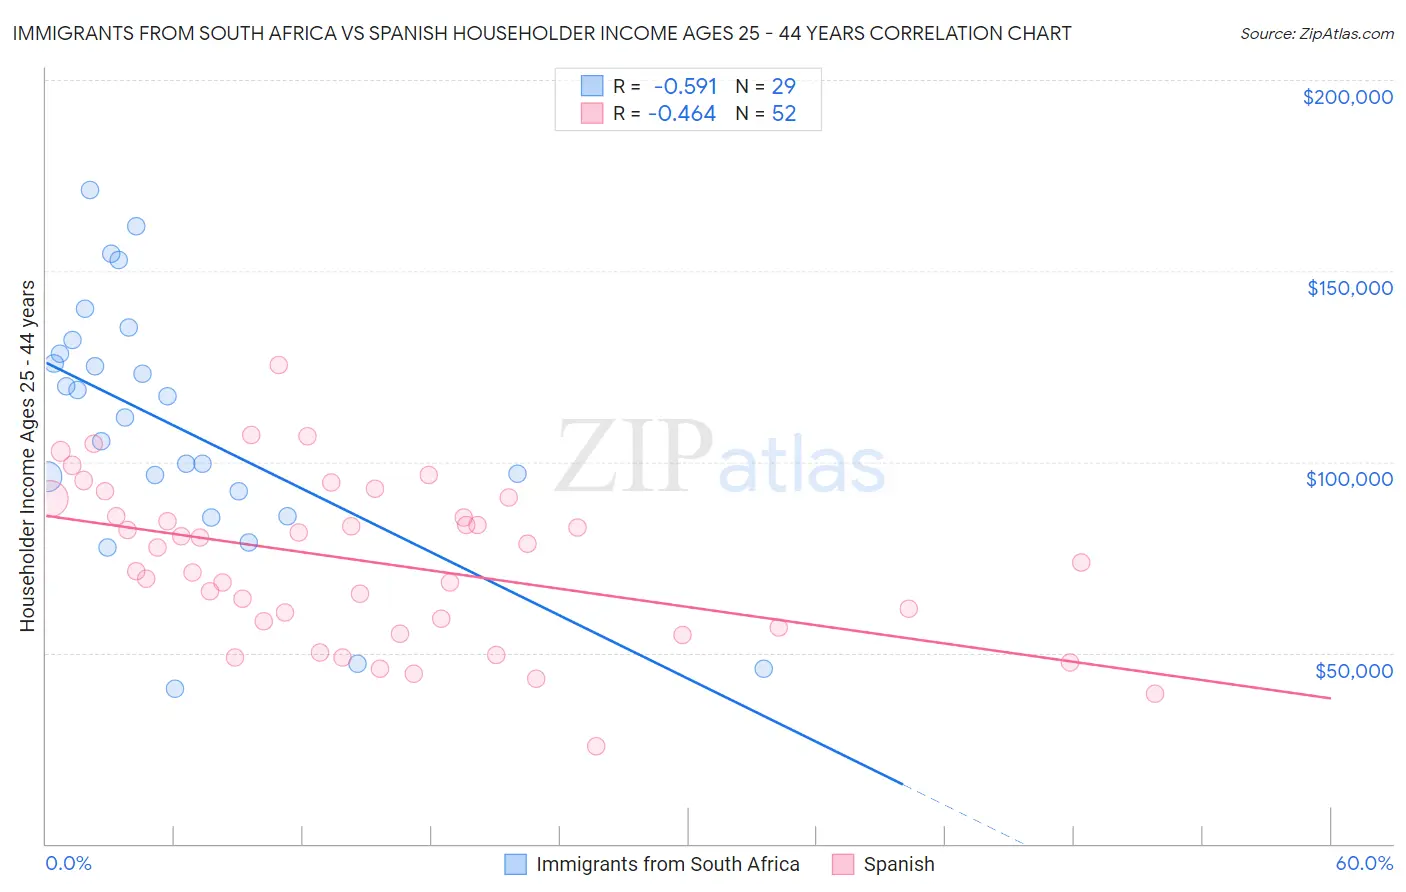 Immigrants from South Africa vs Spanish Householder Income Ages 25 - 44 years